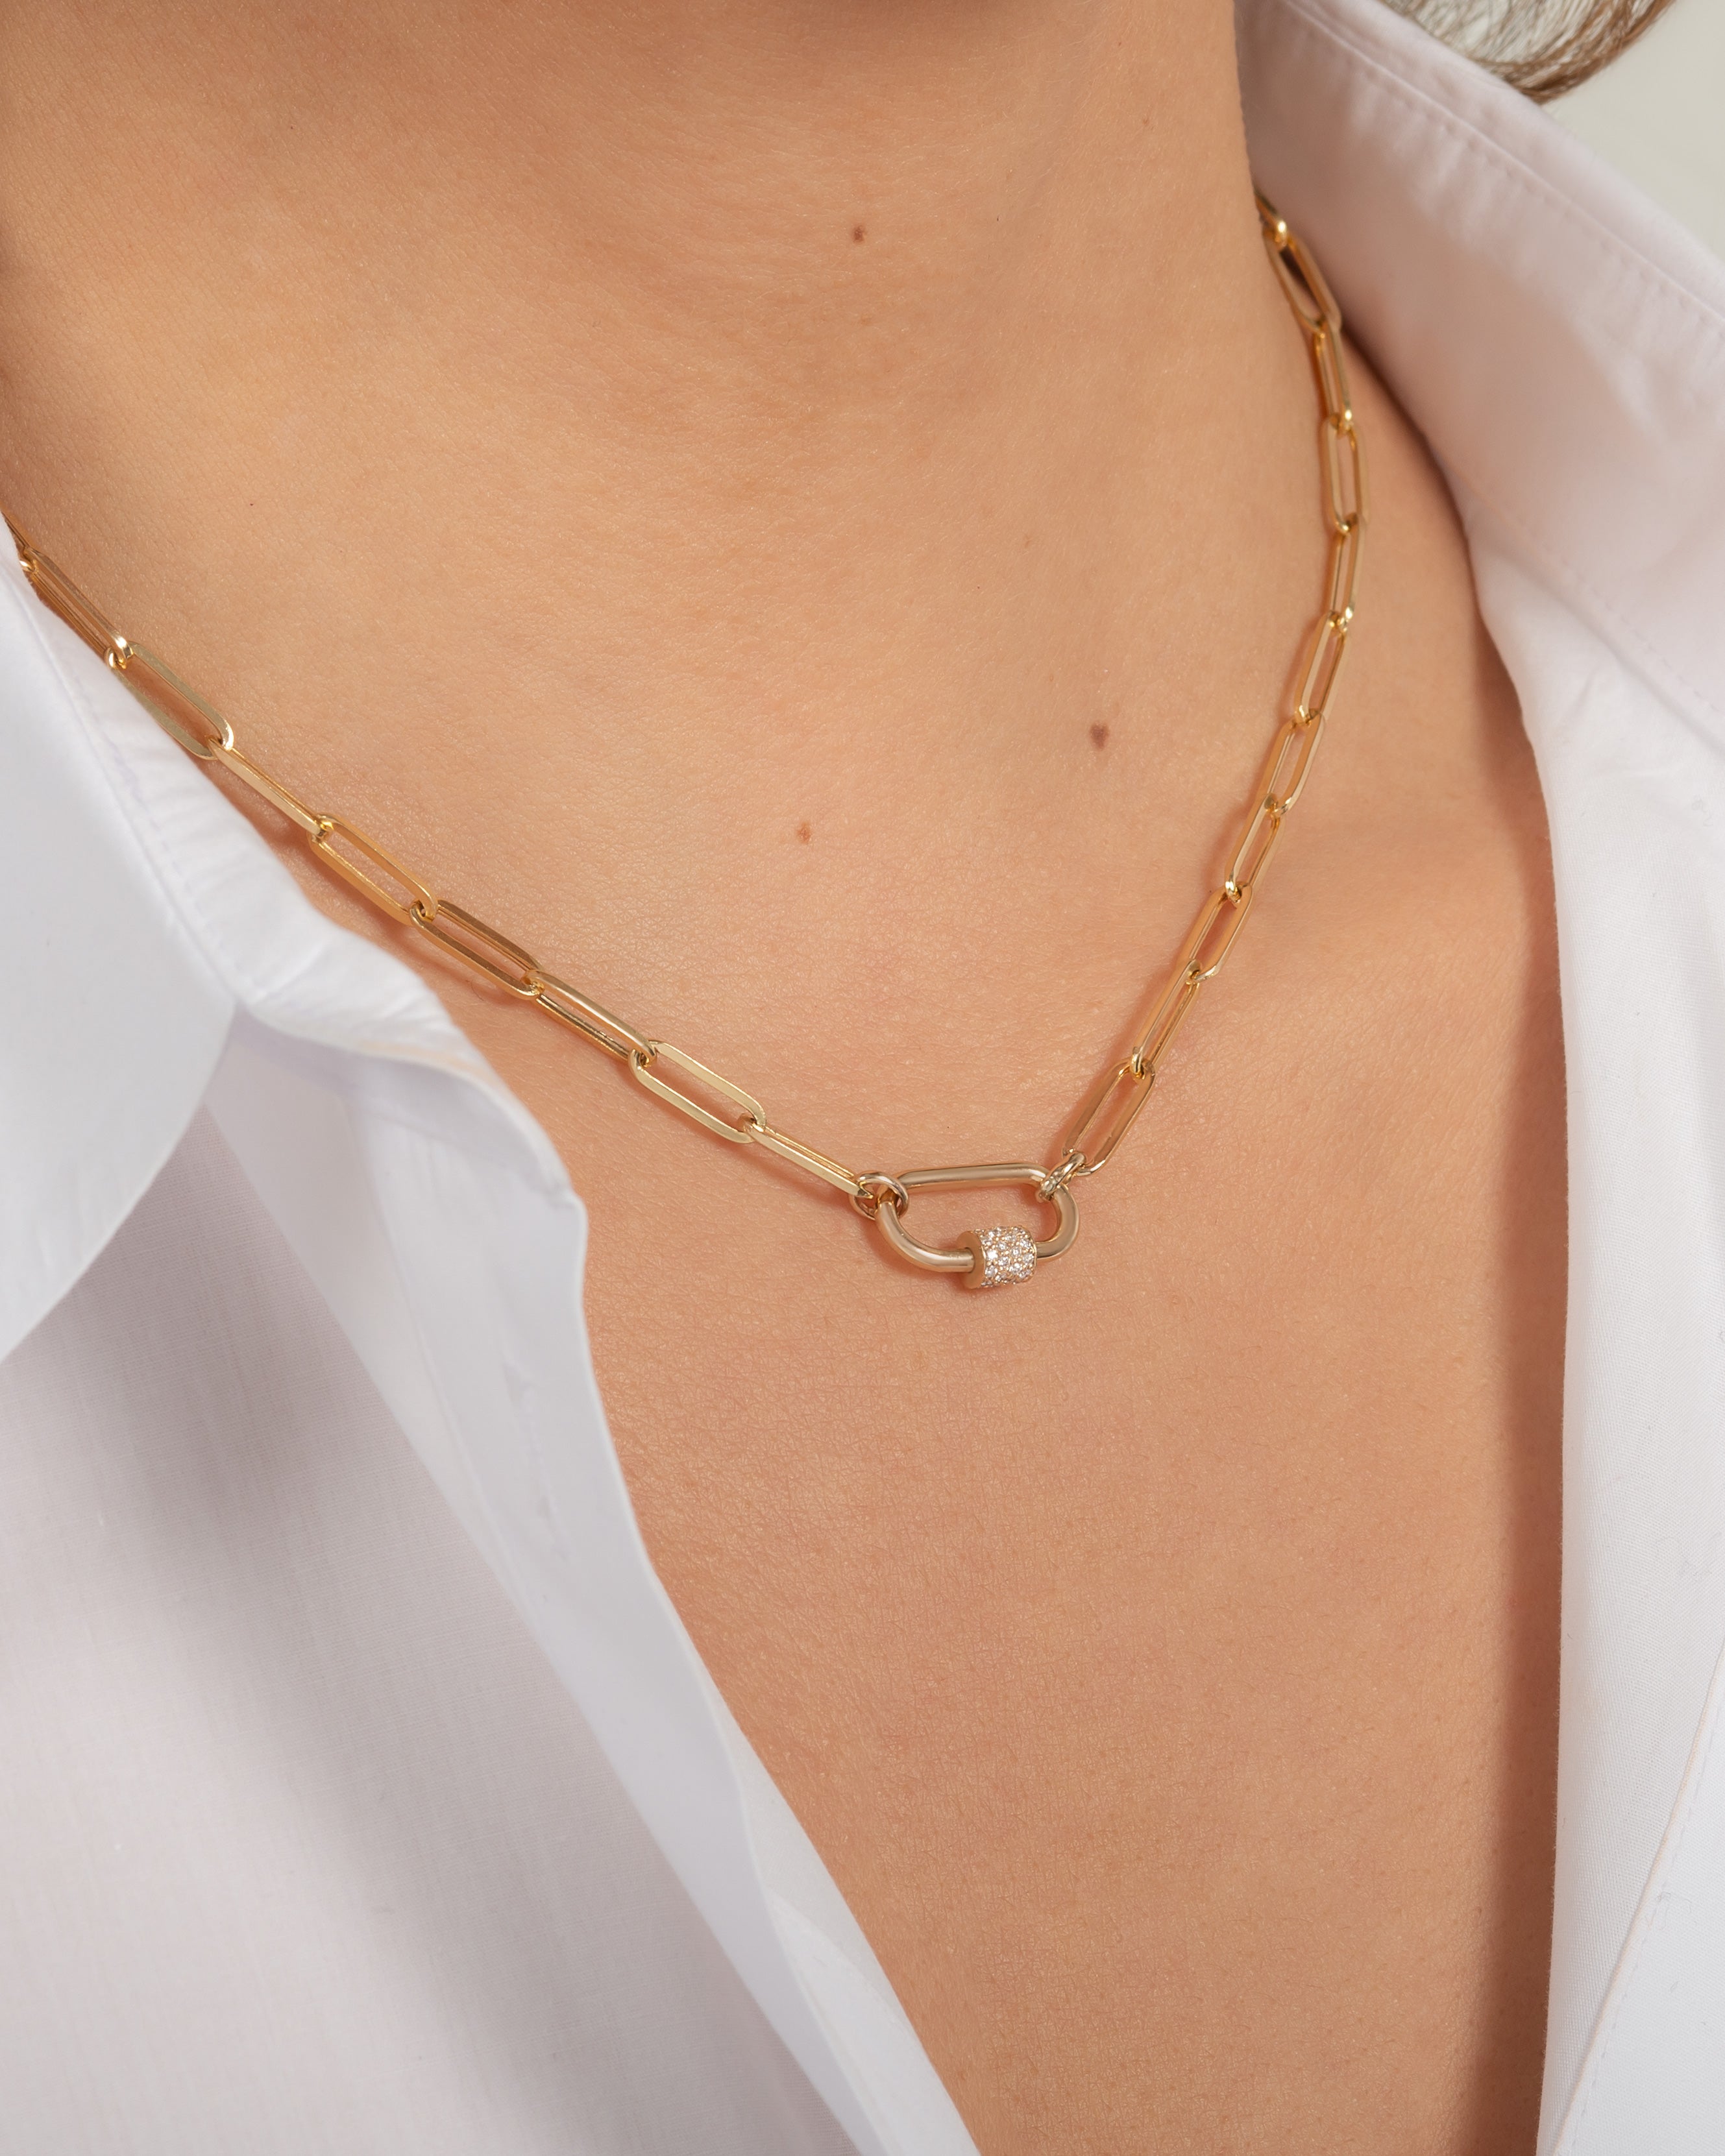 Bujukan Carabiner Lock Necklace with Hollow Paperclip Chain in 14k